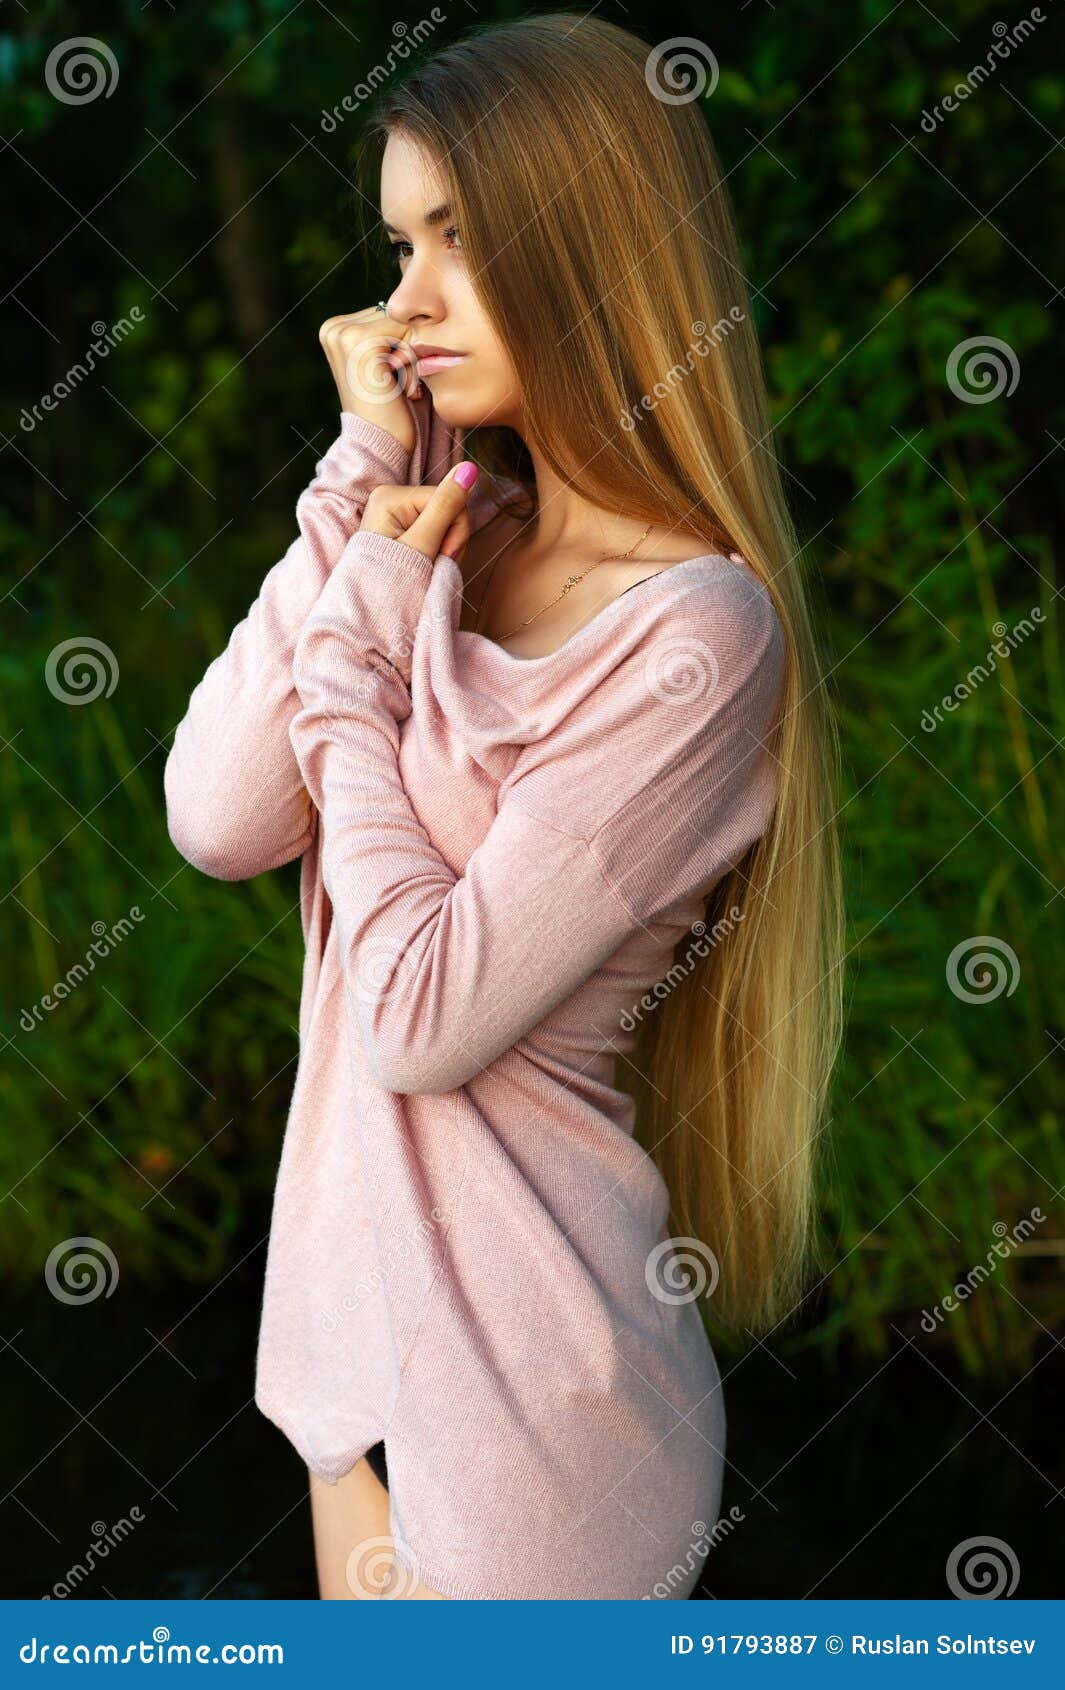 Femininity Girl Teenager with Luxurious Long Hair Stock Image - Image of  hairstyle, dress: 91793887